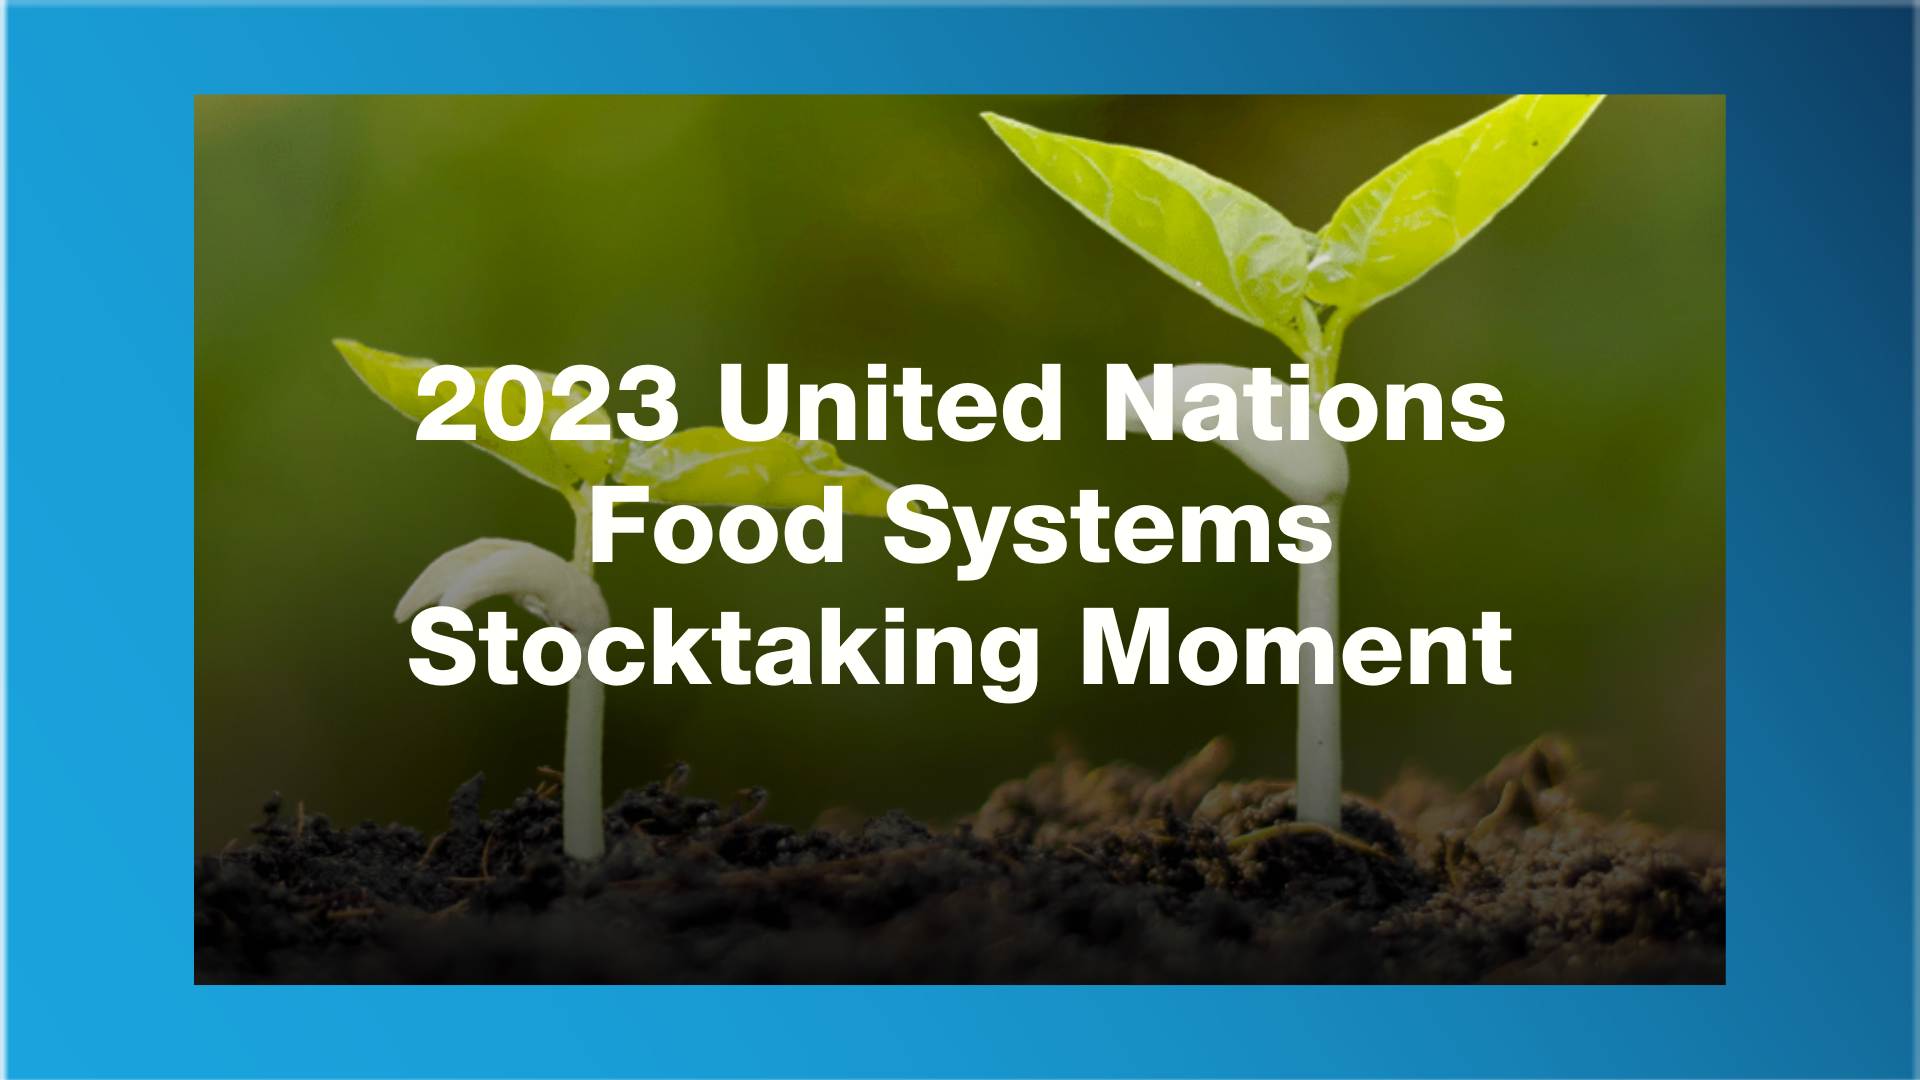 2023 UN Food Systems Stocktaking Moment